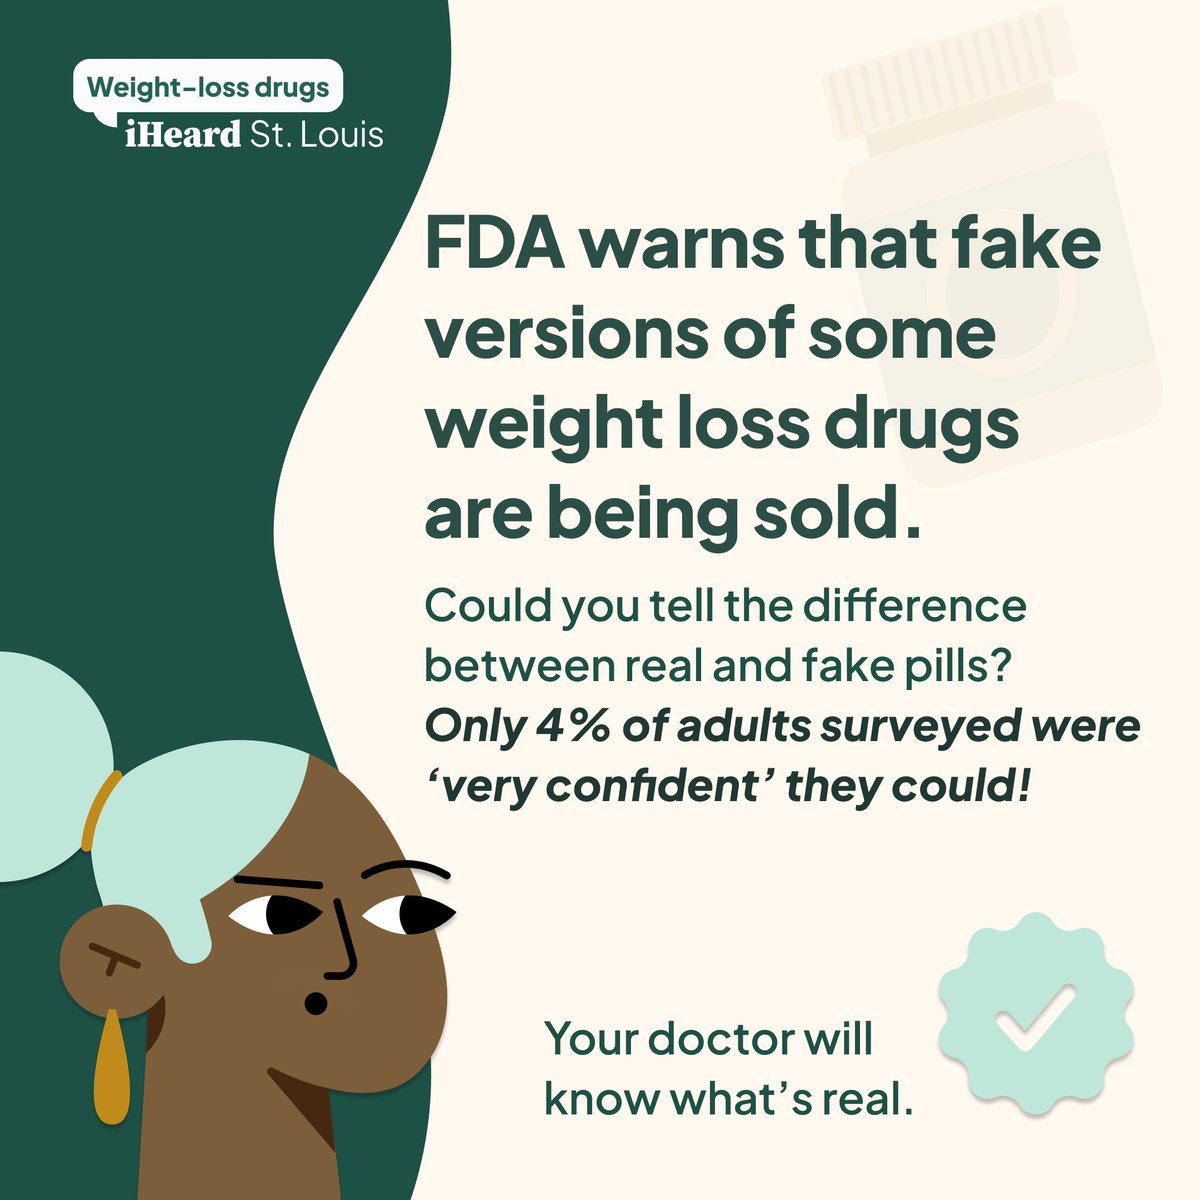 Ozempic should only be obtained with a valid prescription & through state-licensed pharmacies. Check the product before using for any signs of counterfeiting. Visit FDA.gov for more information about counterfeit Ozempic. #iHeardSTL #WeightLossDrugs #StayAware